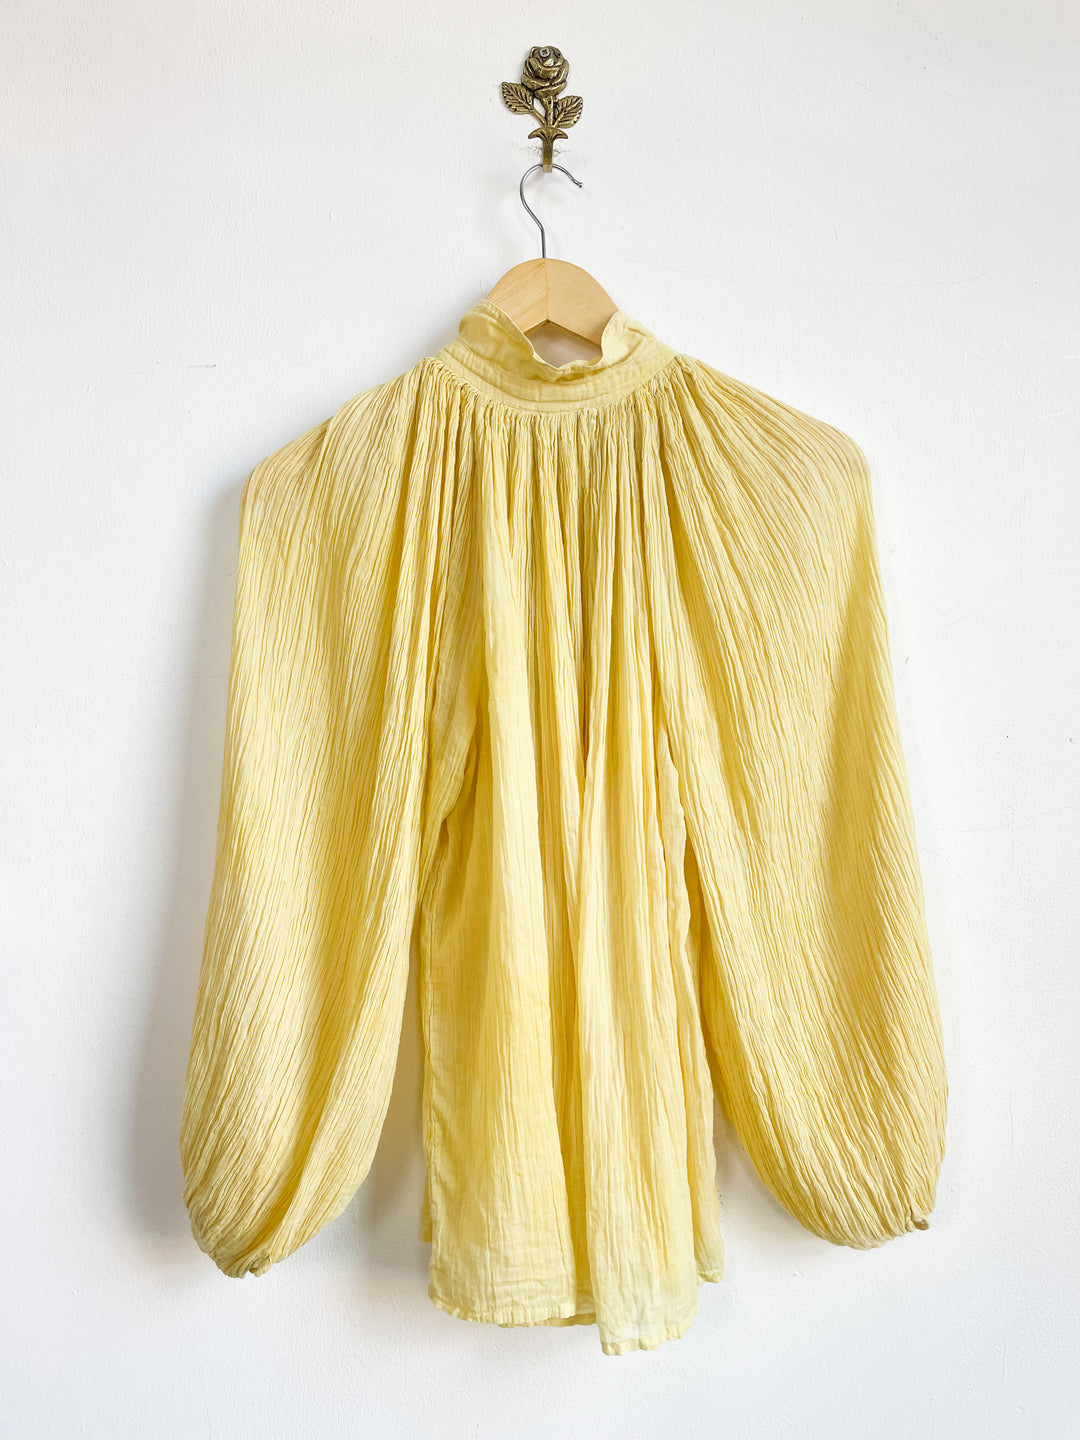 The Goldfinch Blouse